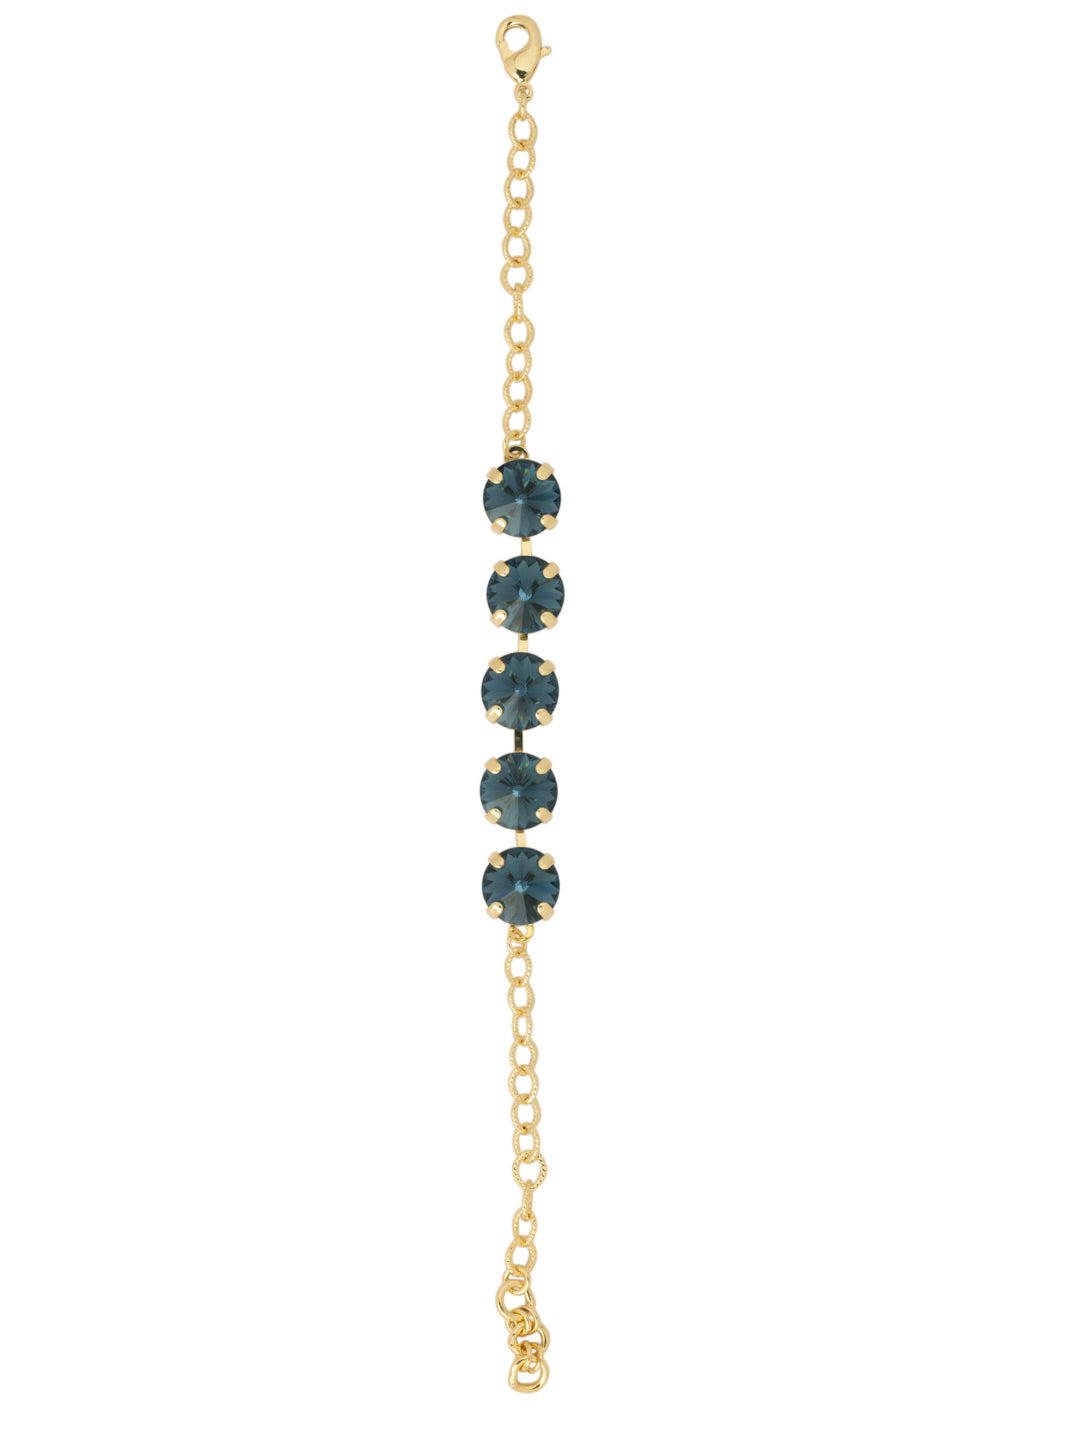 Mara Tennis Bracelet - BFD75BGMON - <p>The Mara Tennis Bracelet highlights radiant rivoli cut crystals on an adjustable chain, secured with a lobster claw clasp. From Sorrelli's Montana collection in our Bright Gold-tone finish.</p>